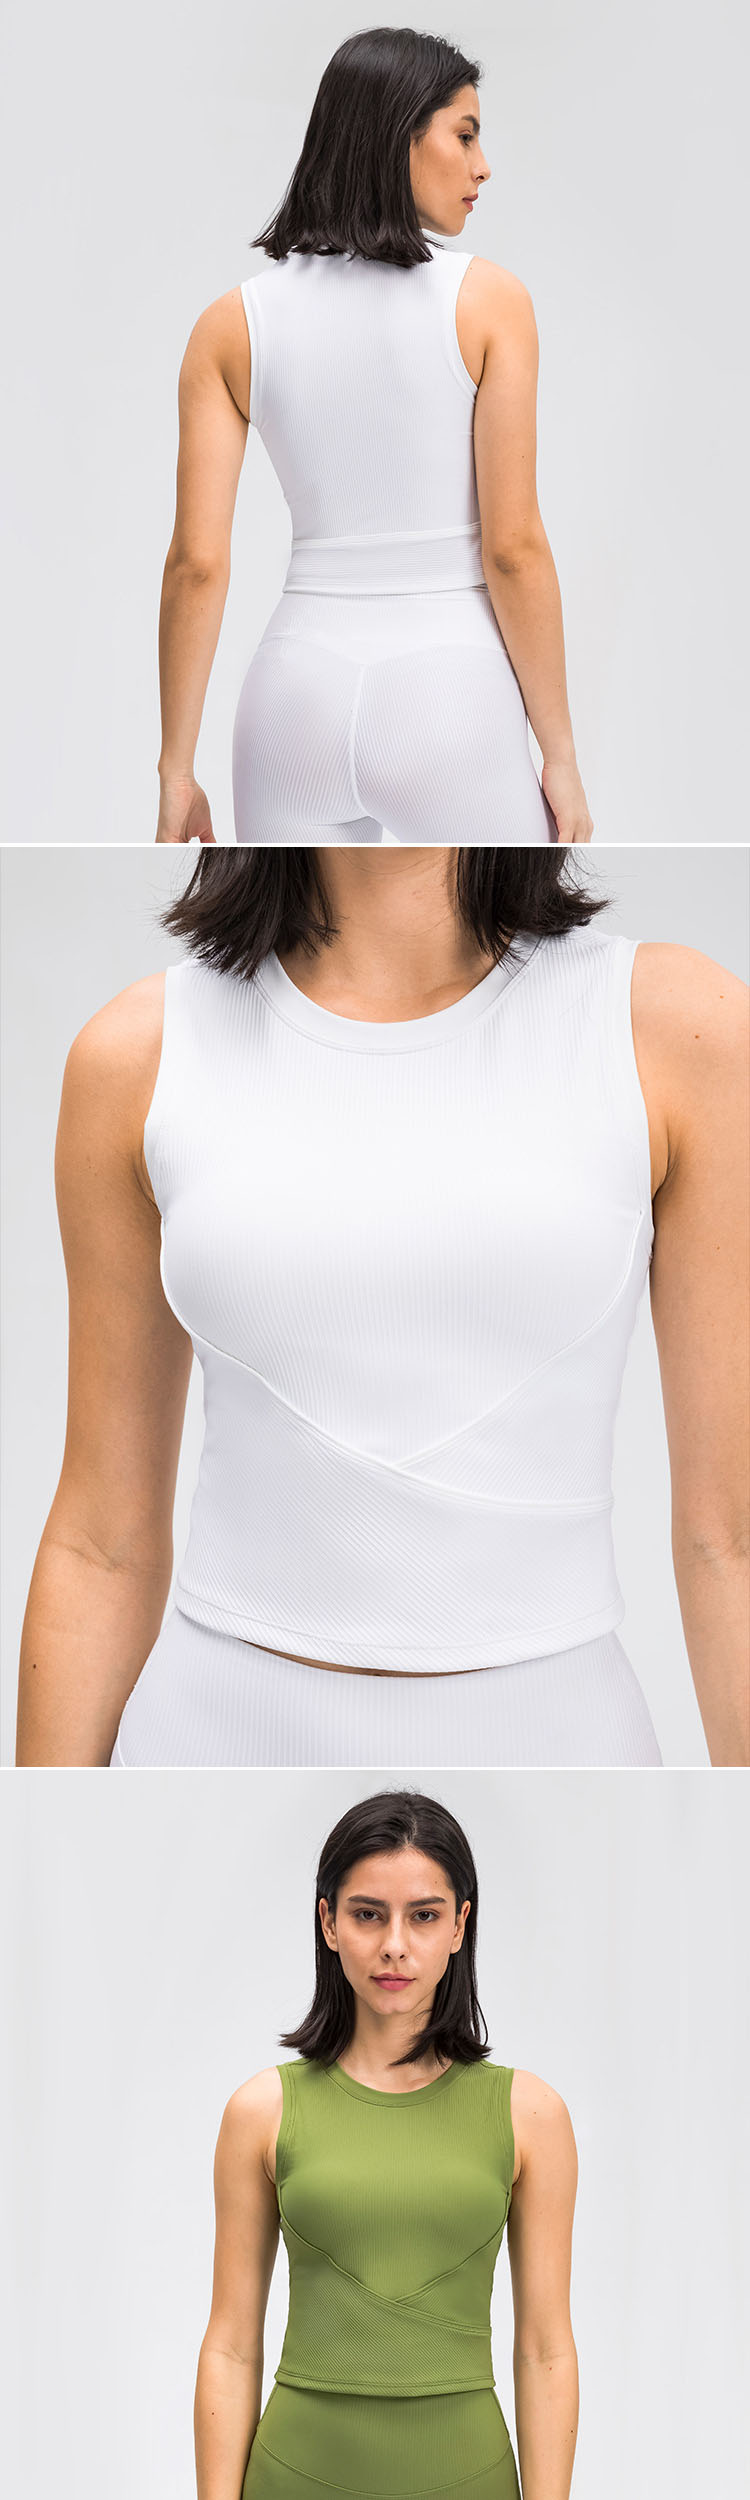 Professional sports quick-drying fabric, absorb heat and sweat, release dryness.